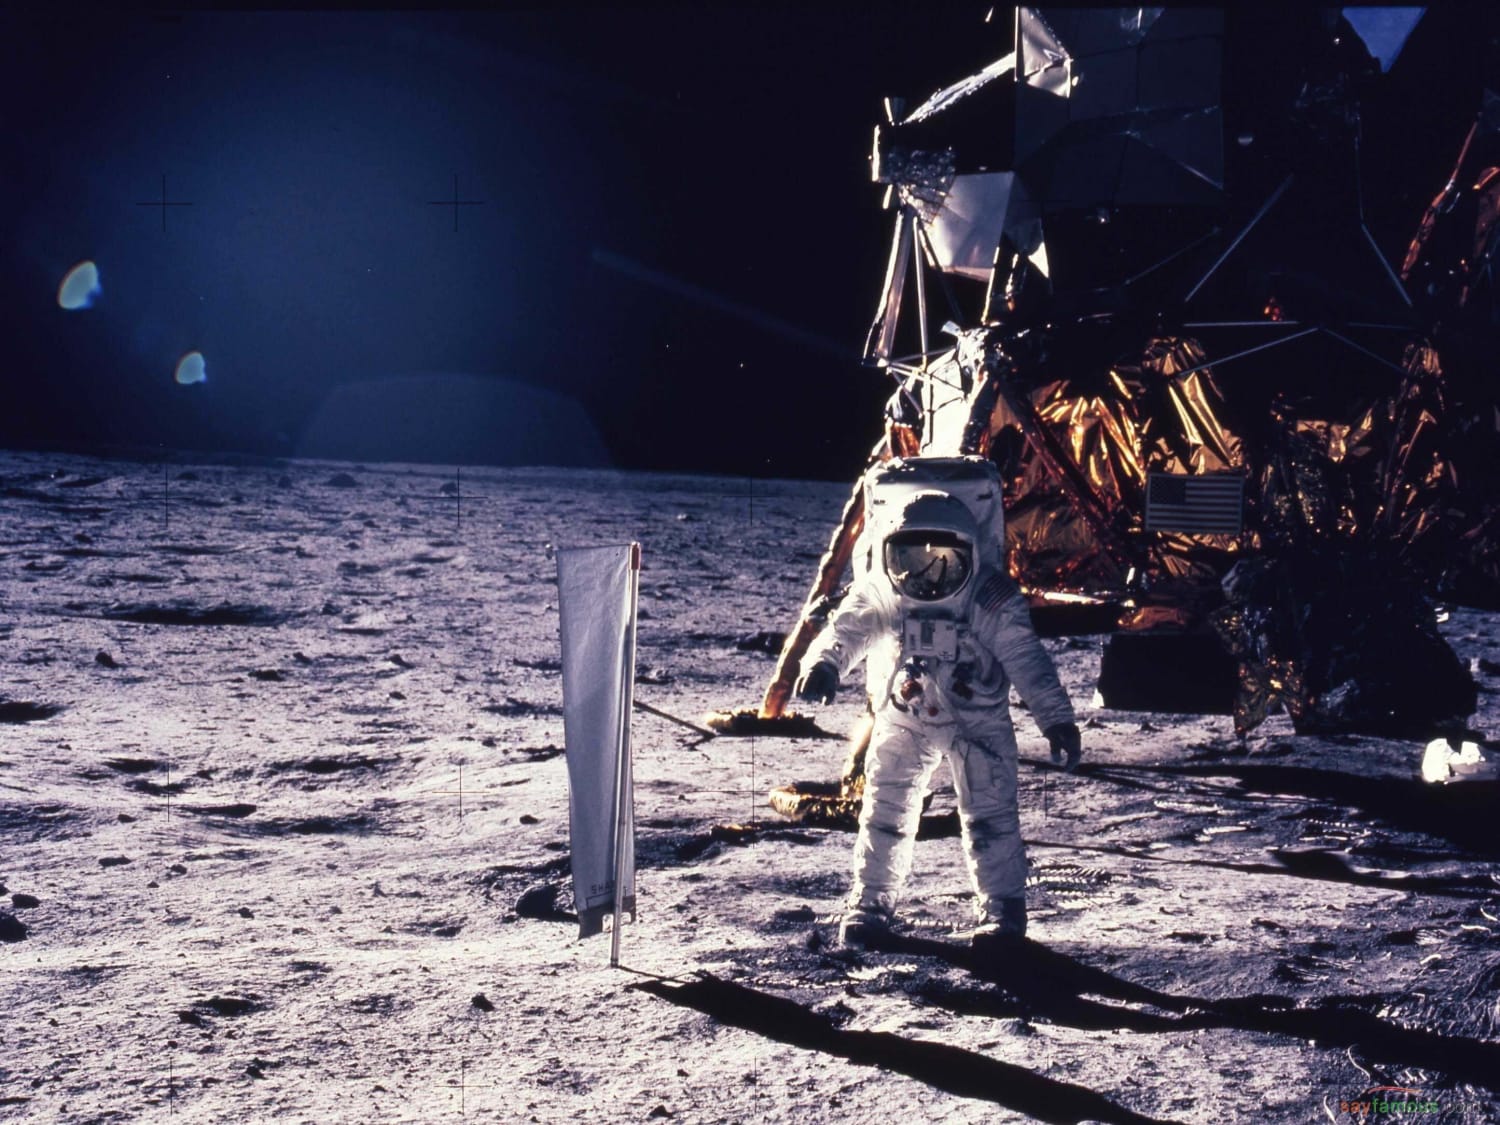 Buzz Aldrin: On the Moon we were ordered by aliens to move away